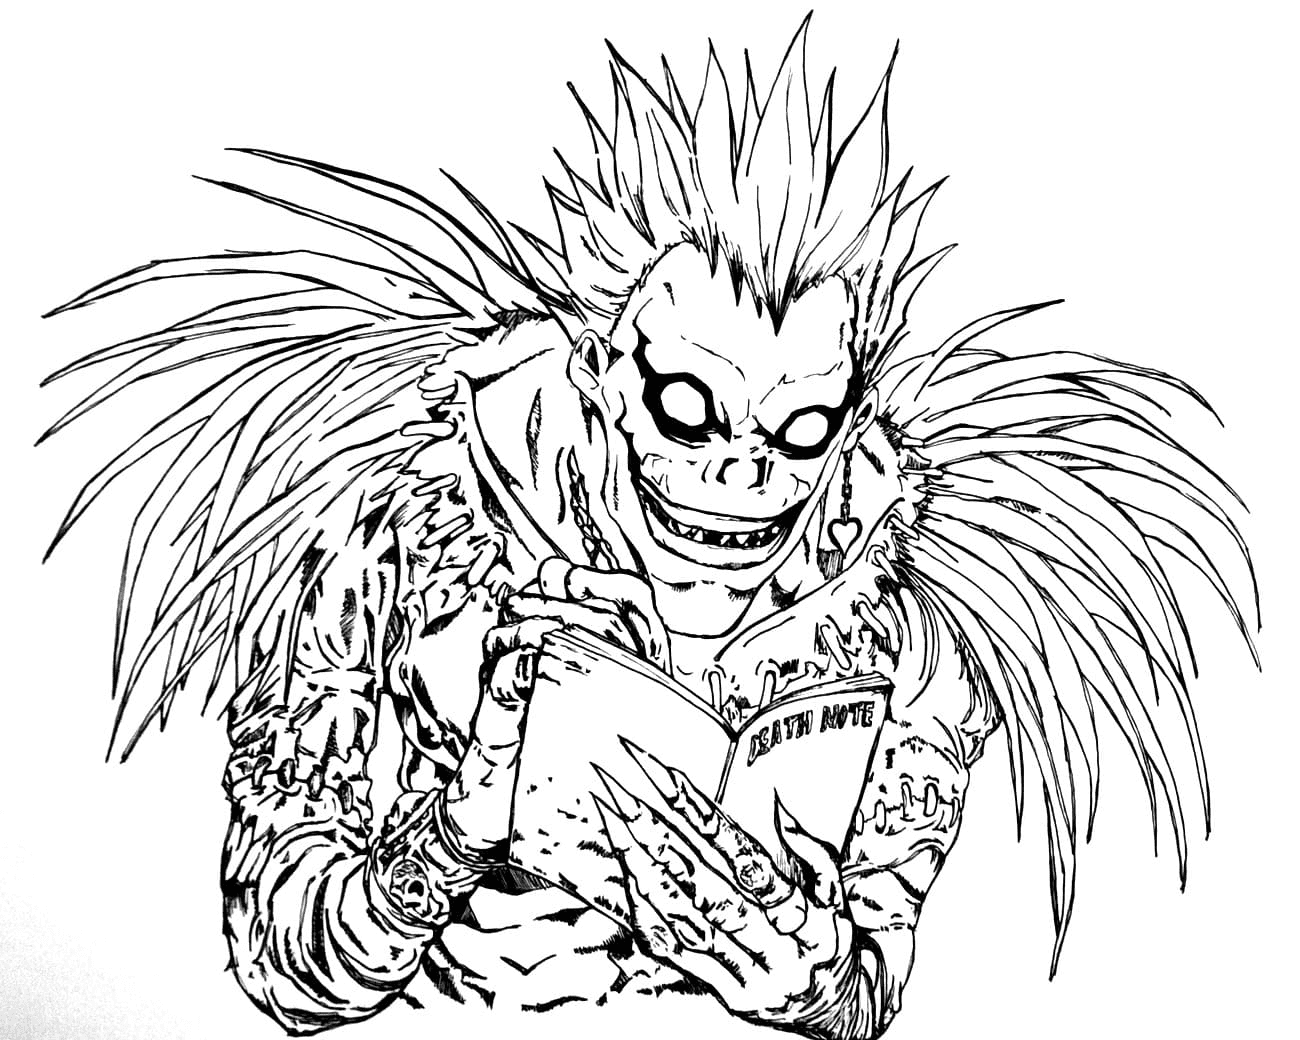 Ryuk with a Death Note Coloring Page